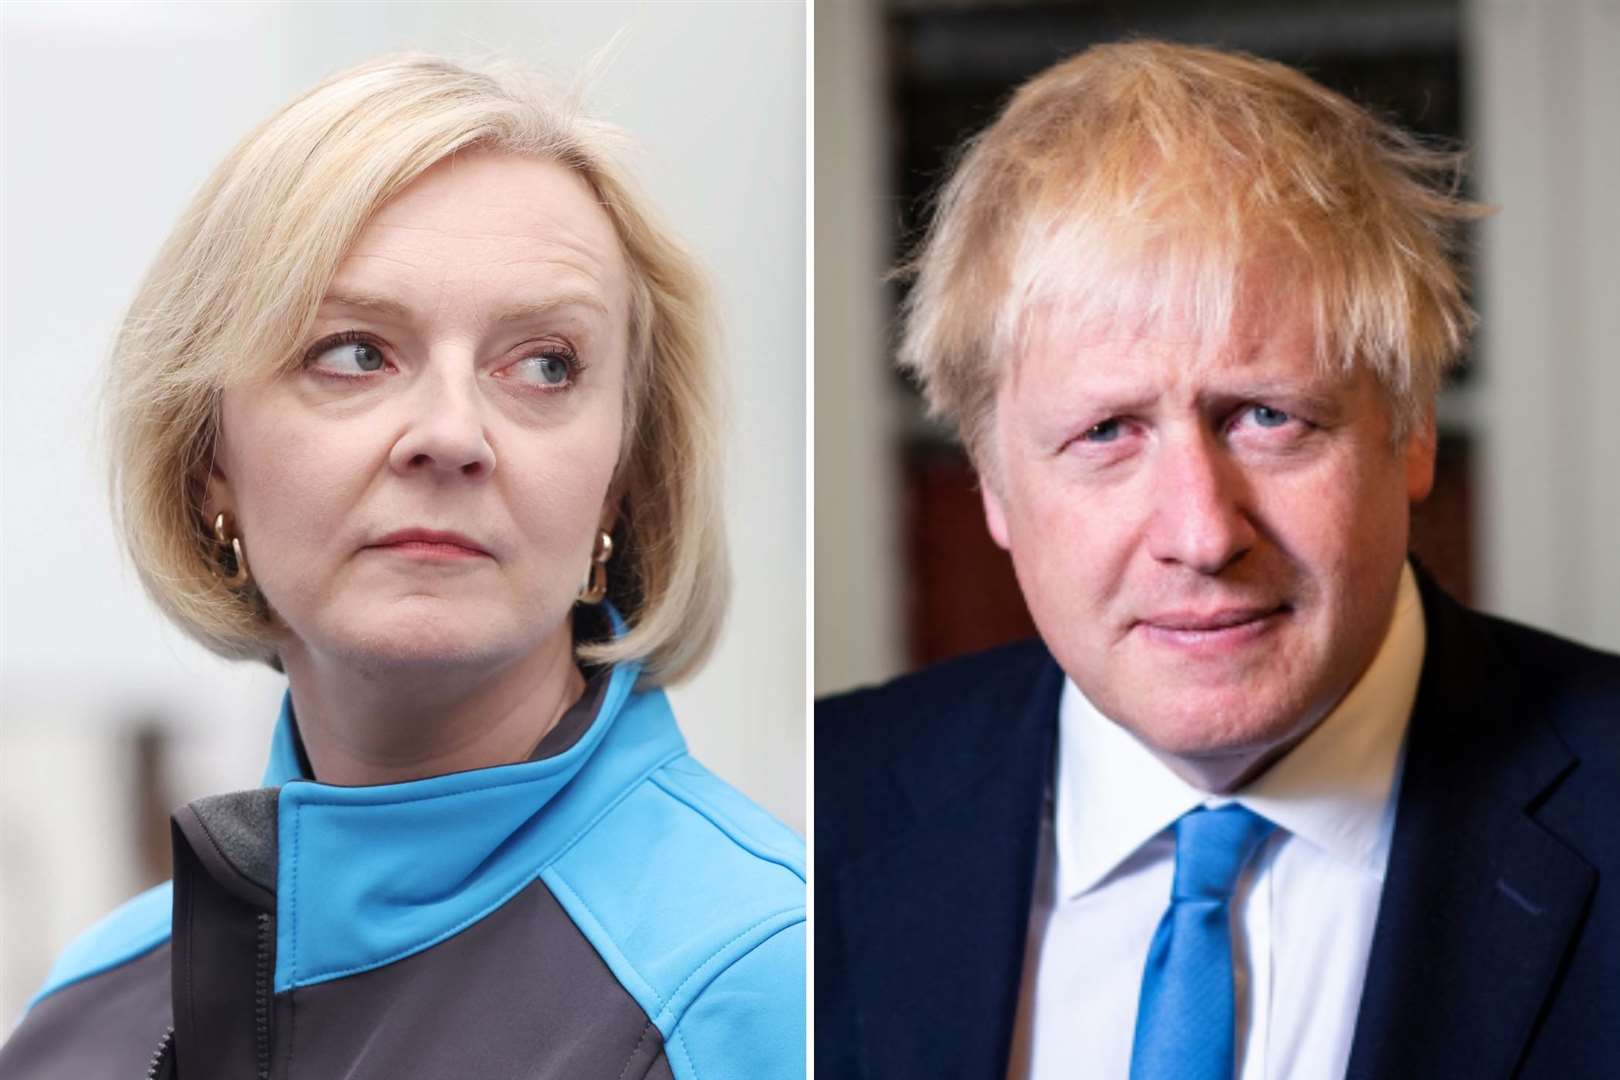 Liz Truss has resigned as Prime Minister and Boris Johnson is reported to be eyeing another tilt at the top job